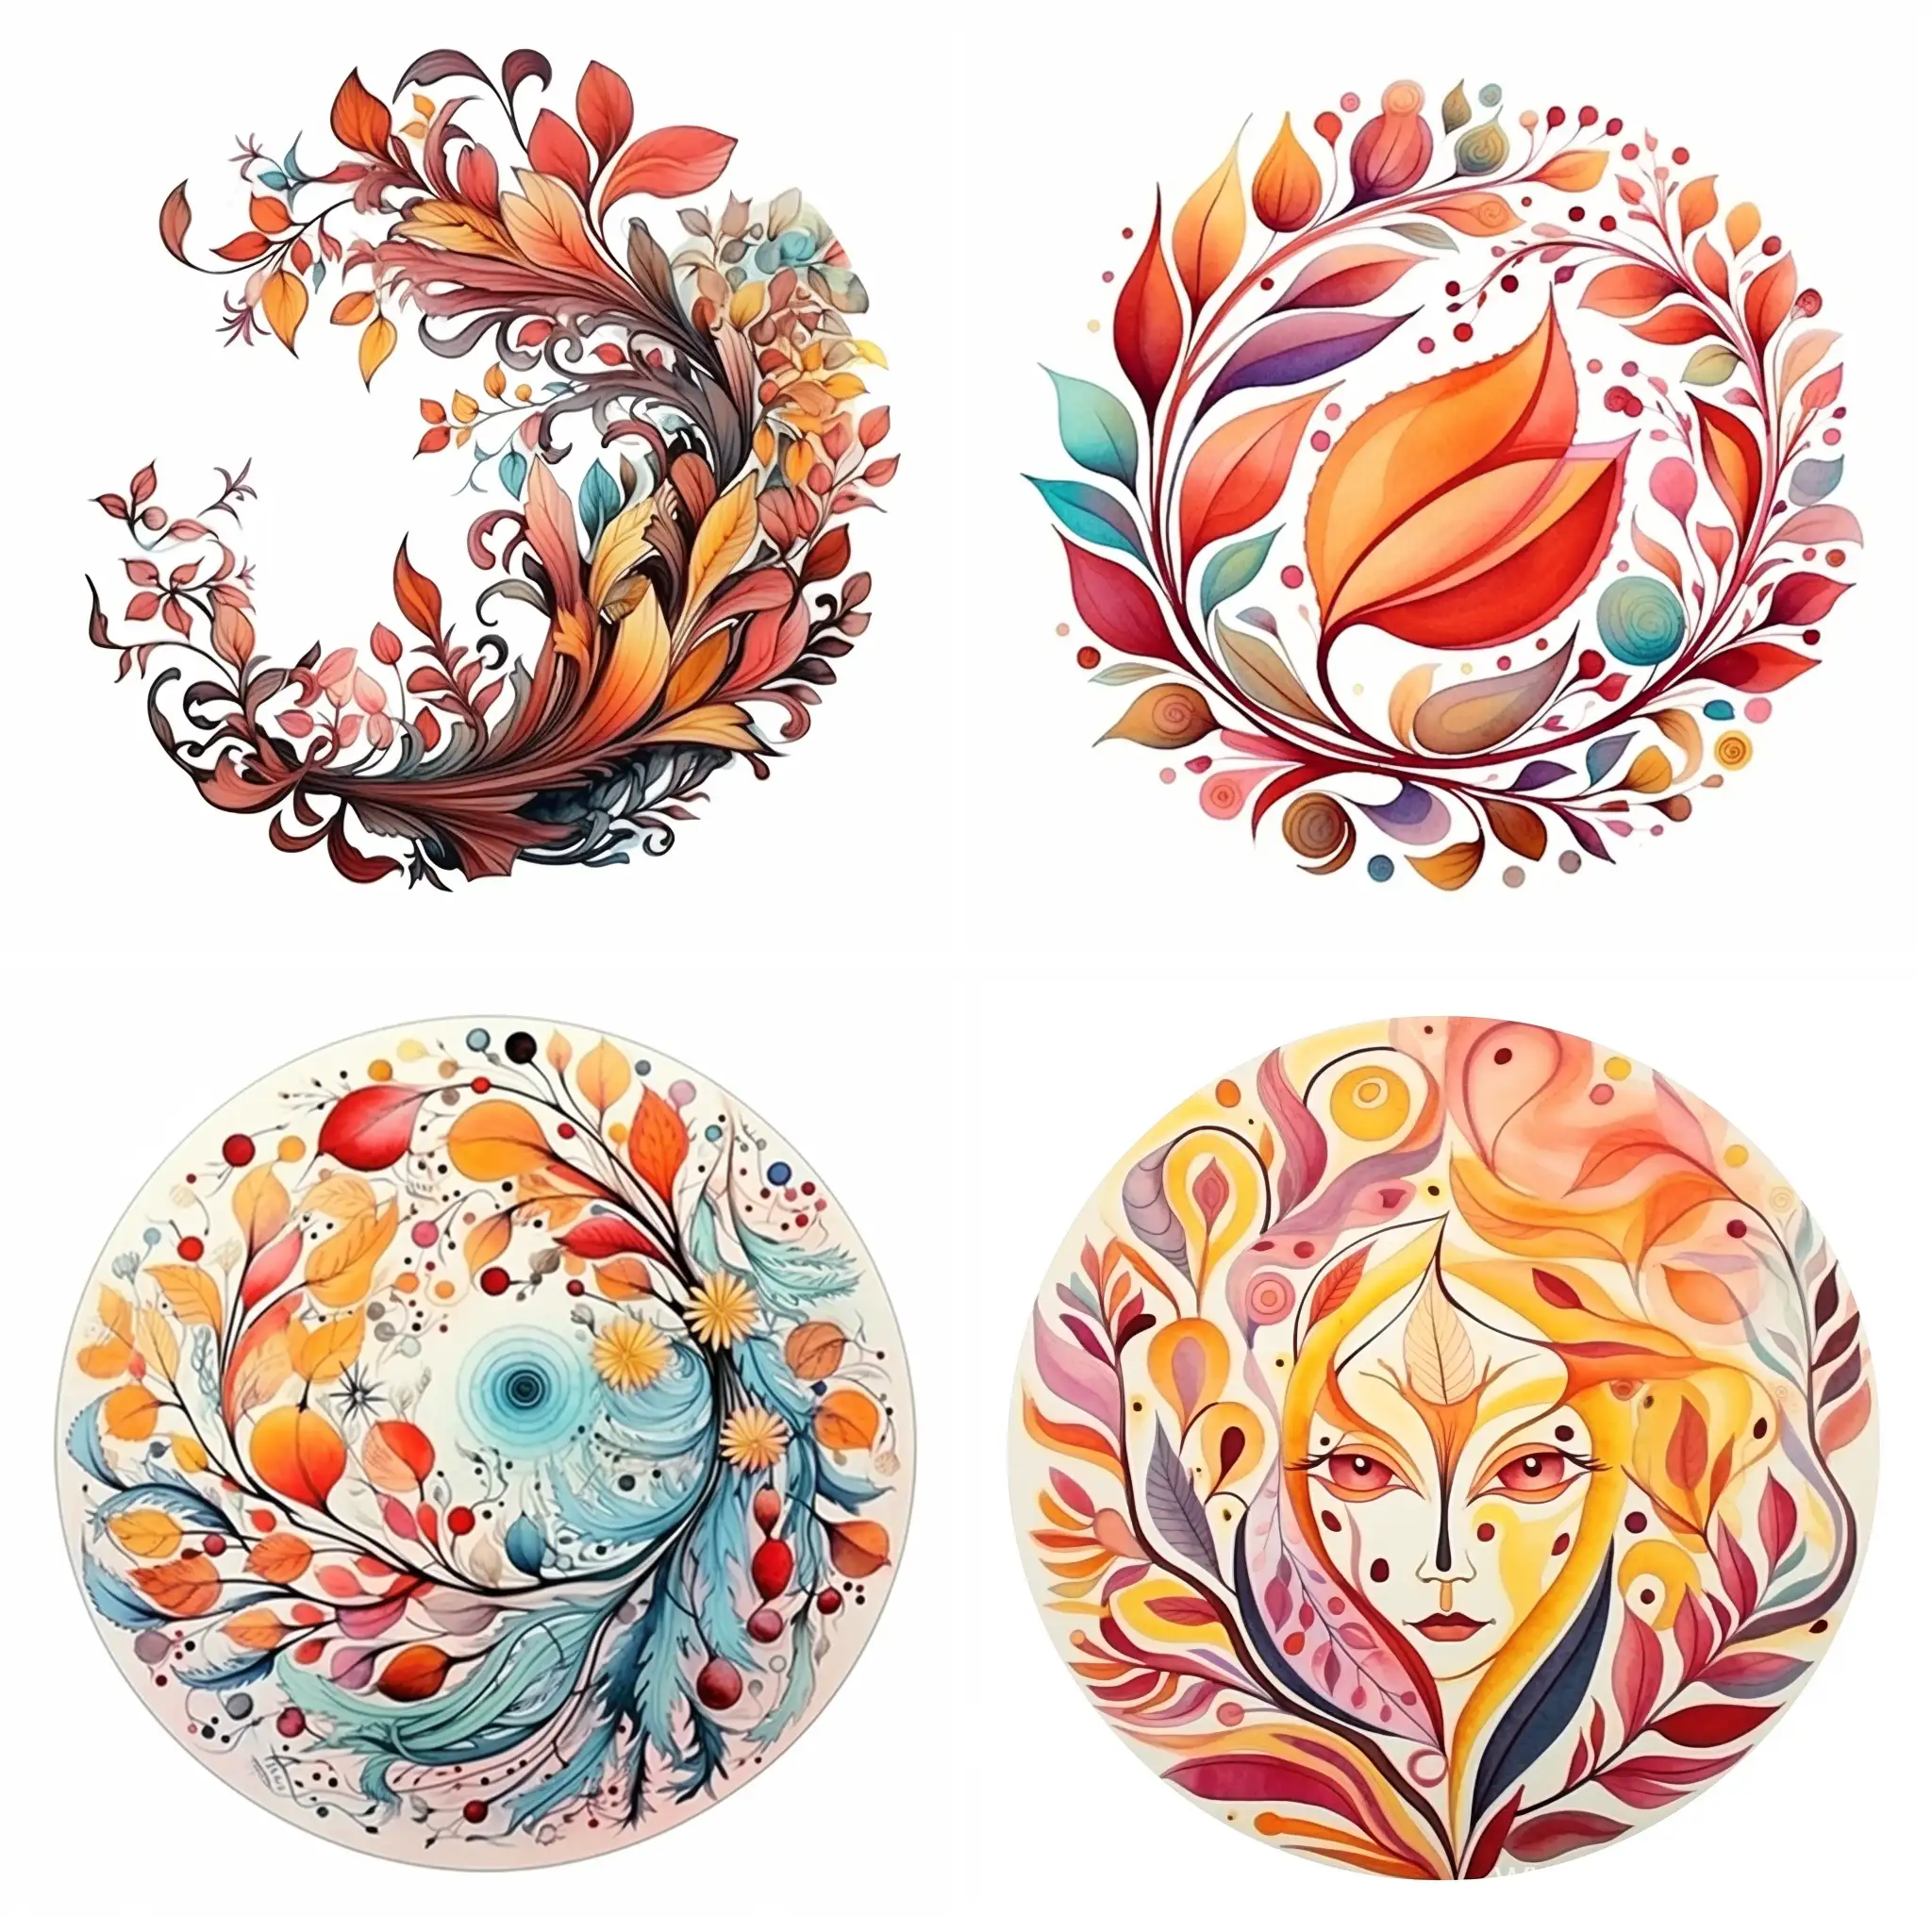 Whimsical-Round-Autumn-Ornament-in-Vibrant-Watercolor-Stylized-Caricature-with-Intricate-Details